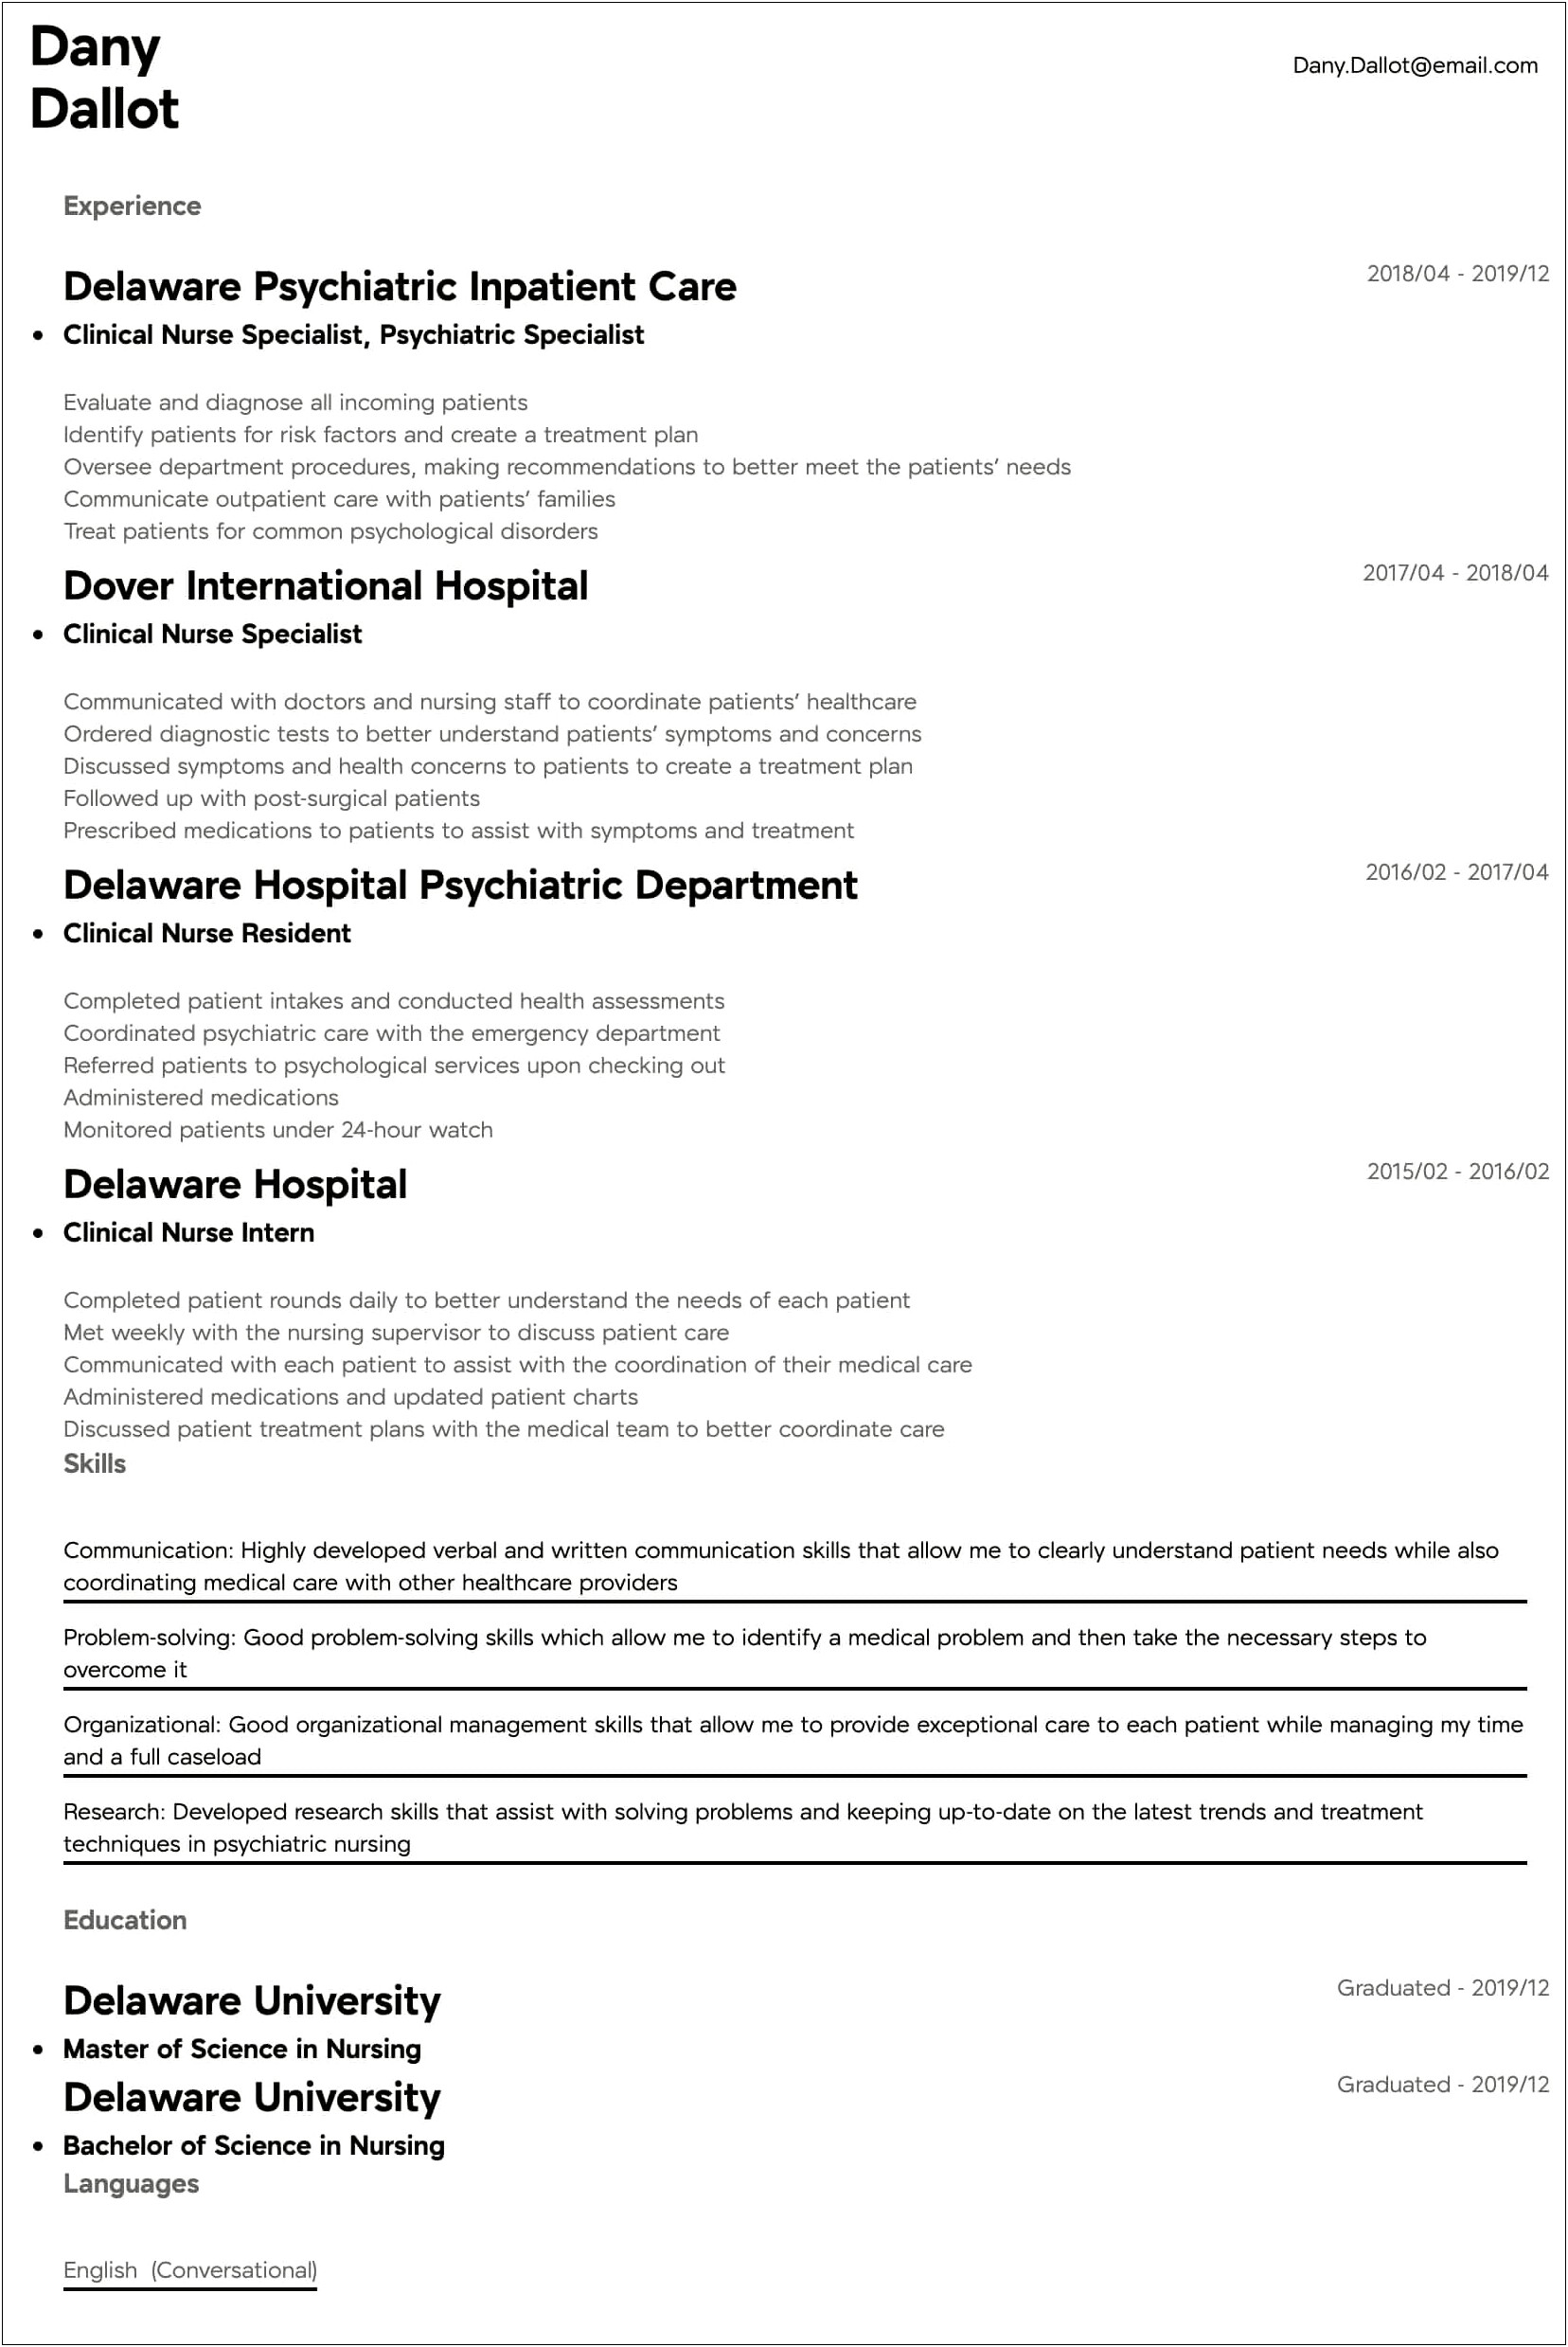 Clinical Supervisor Objective On Resume